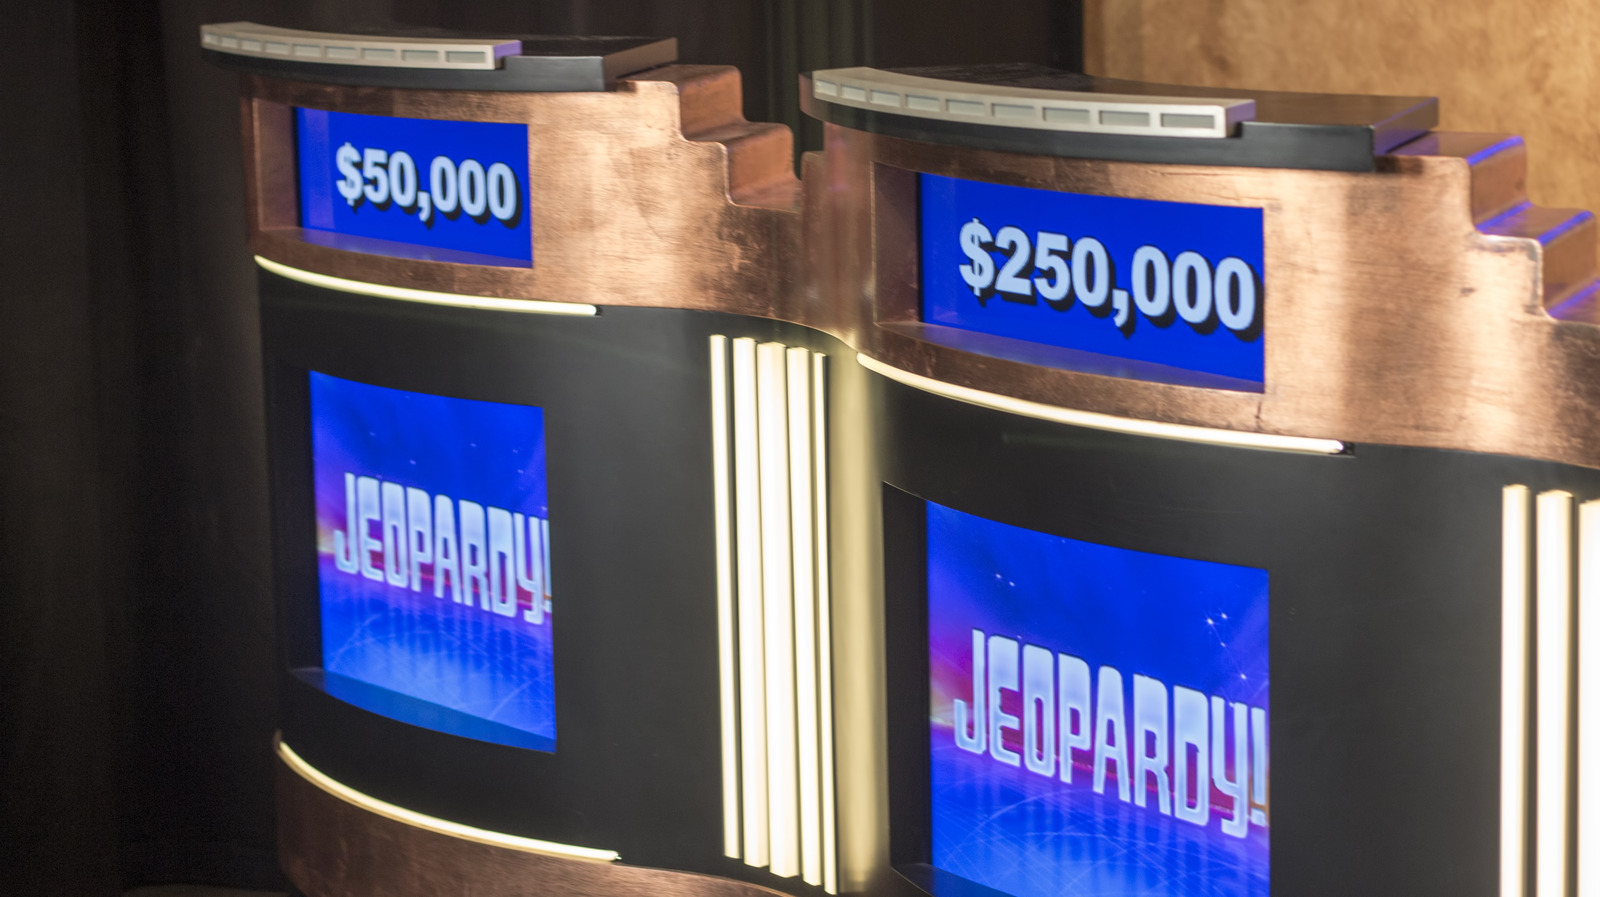 The Top Winners On Jeopardy! Ranked By Prize Money